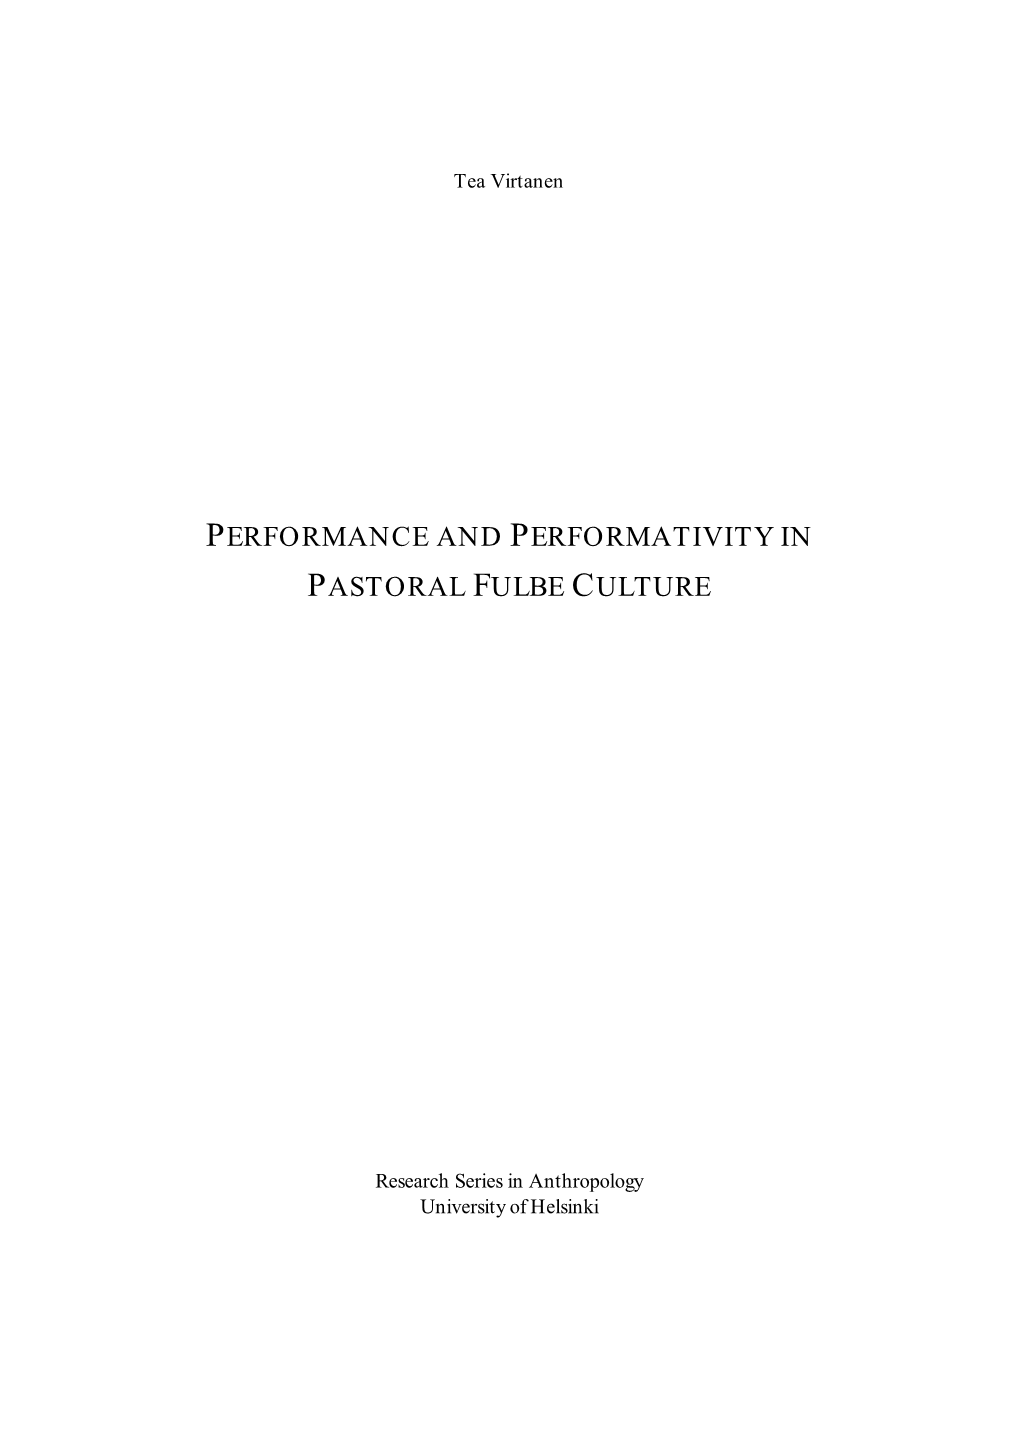 Performance and Performativity in Pastoral Fulbe Culture